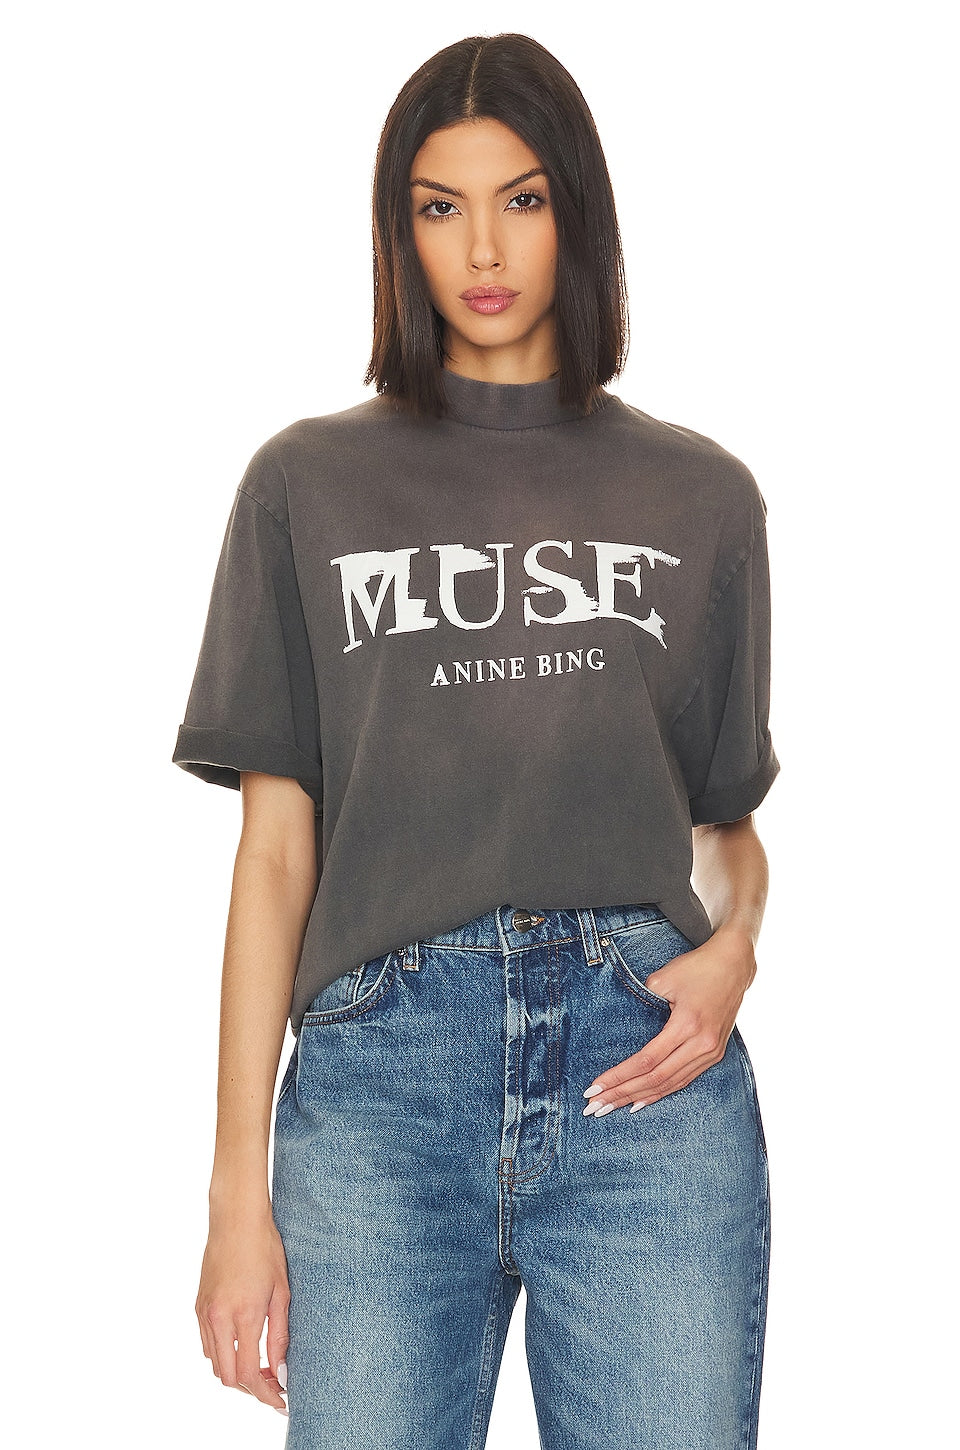 ANINE BING Wes Tee Painted Muse in Washed Faded Black Size Small